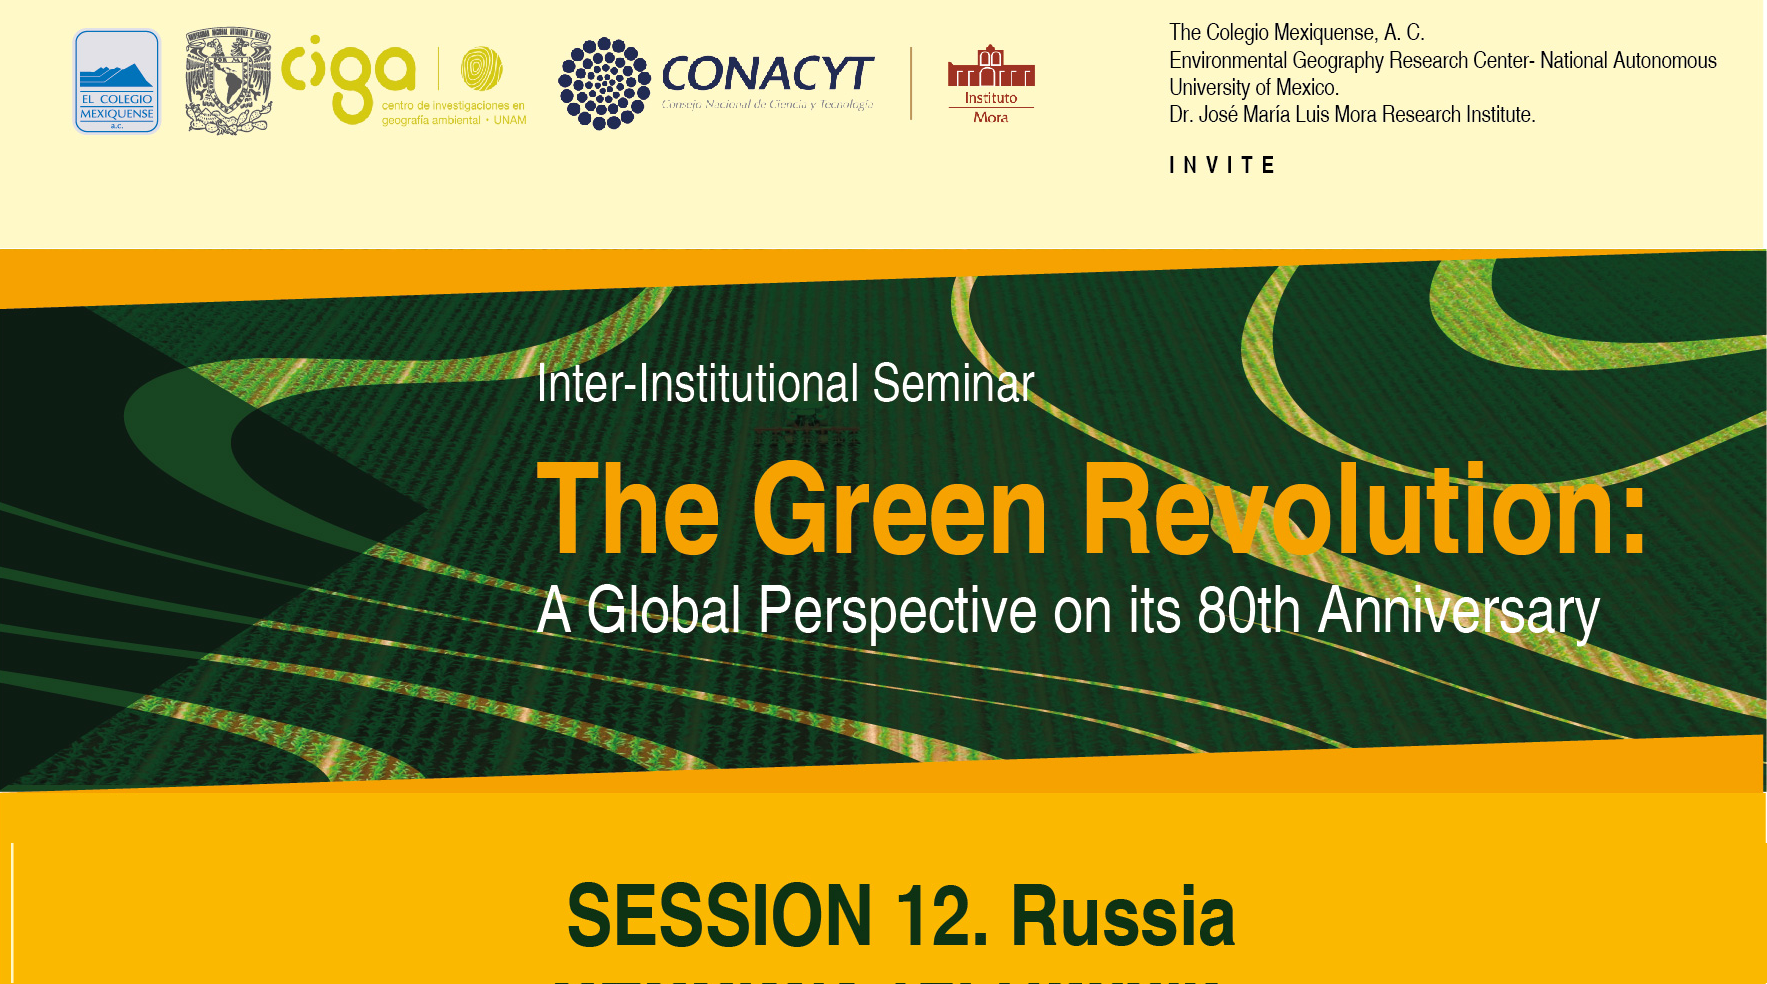 Session 12. Russia. The Green Revolution: A Global Perspective on its 80th Anniversary